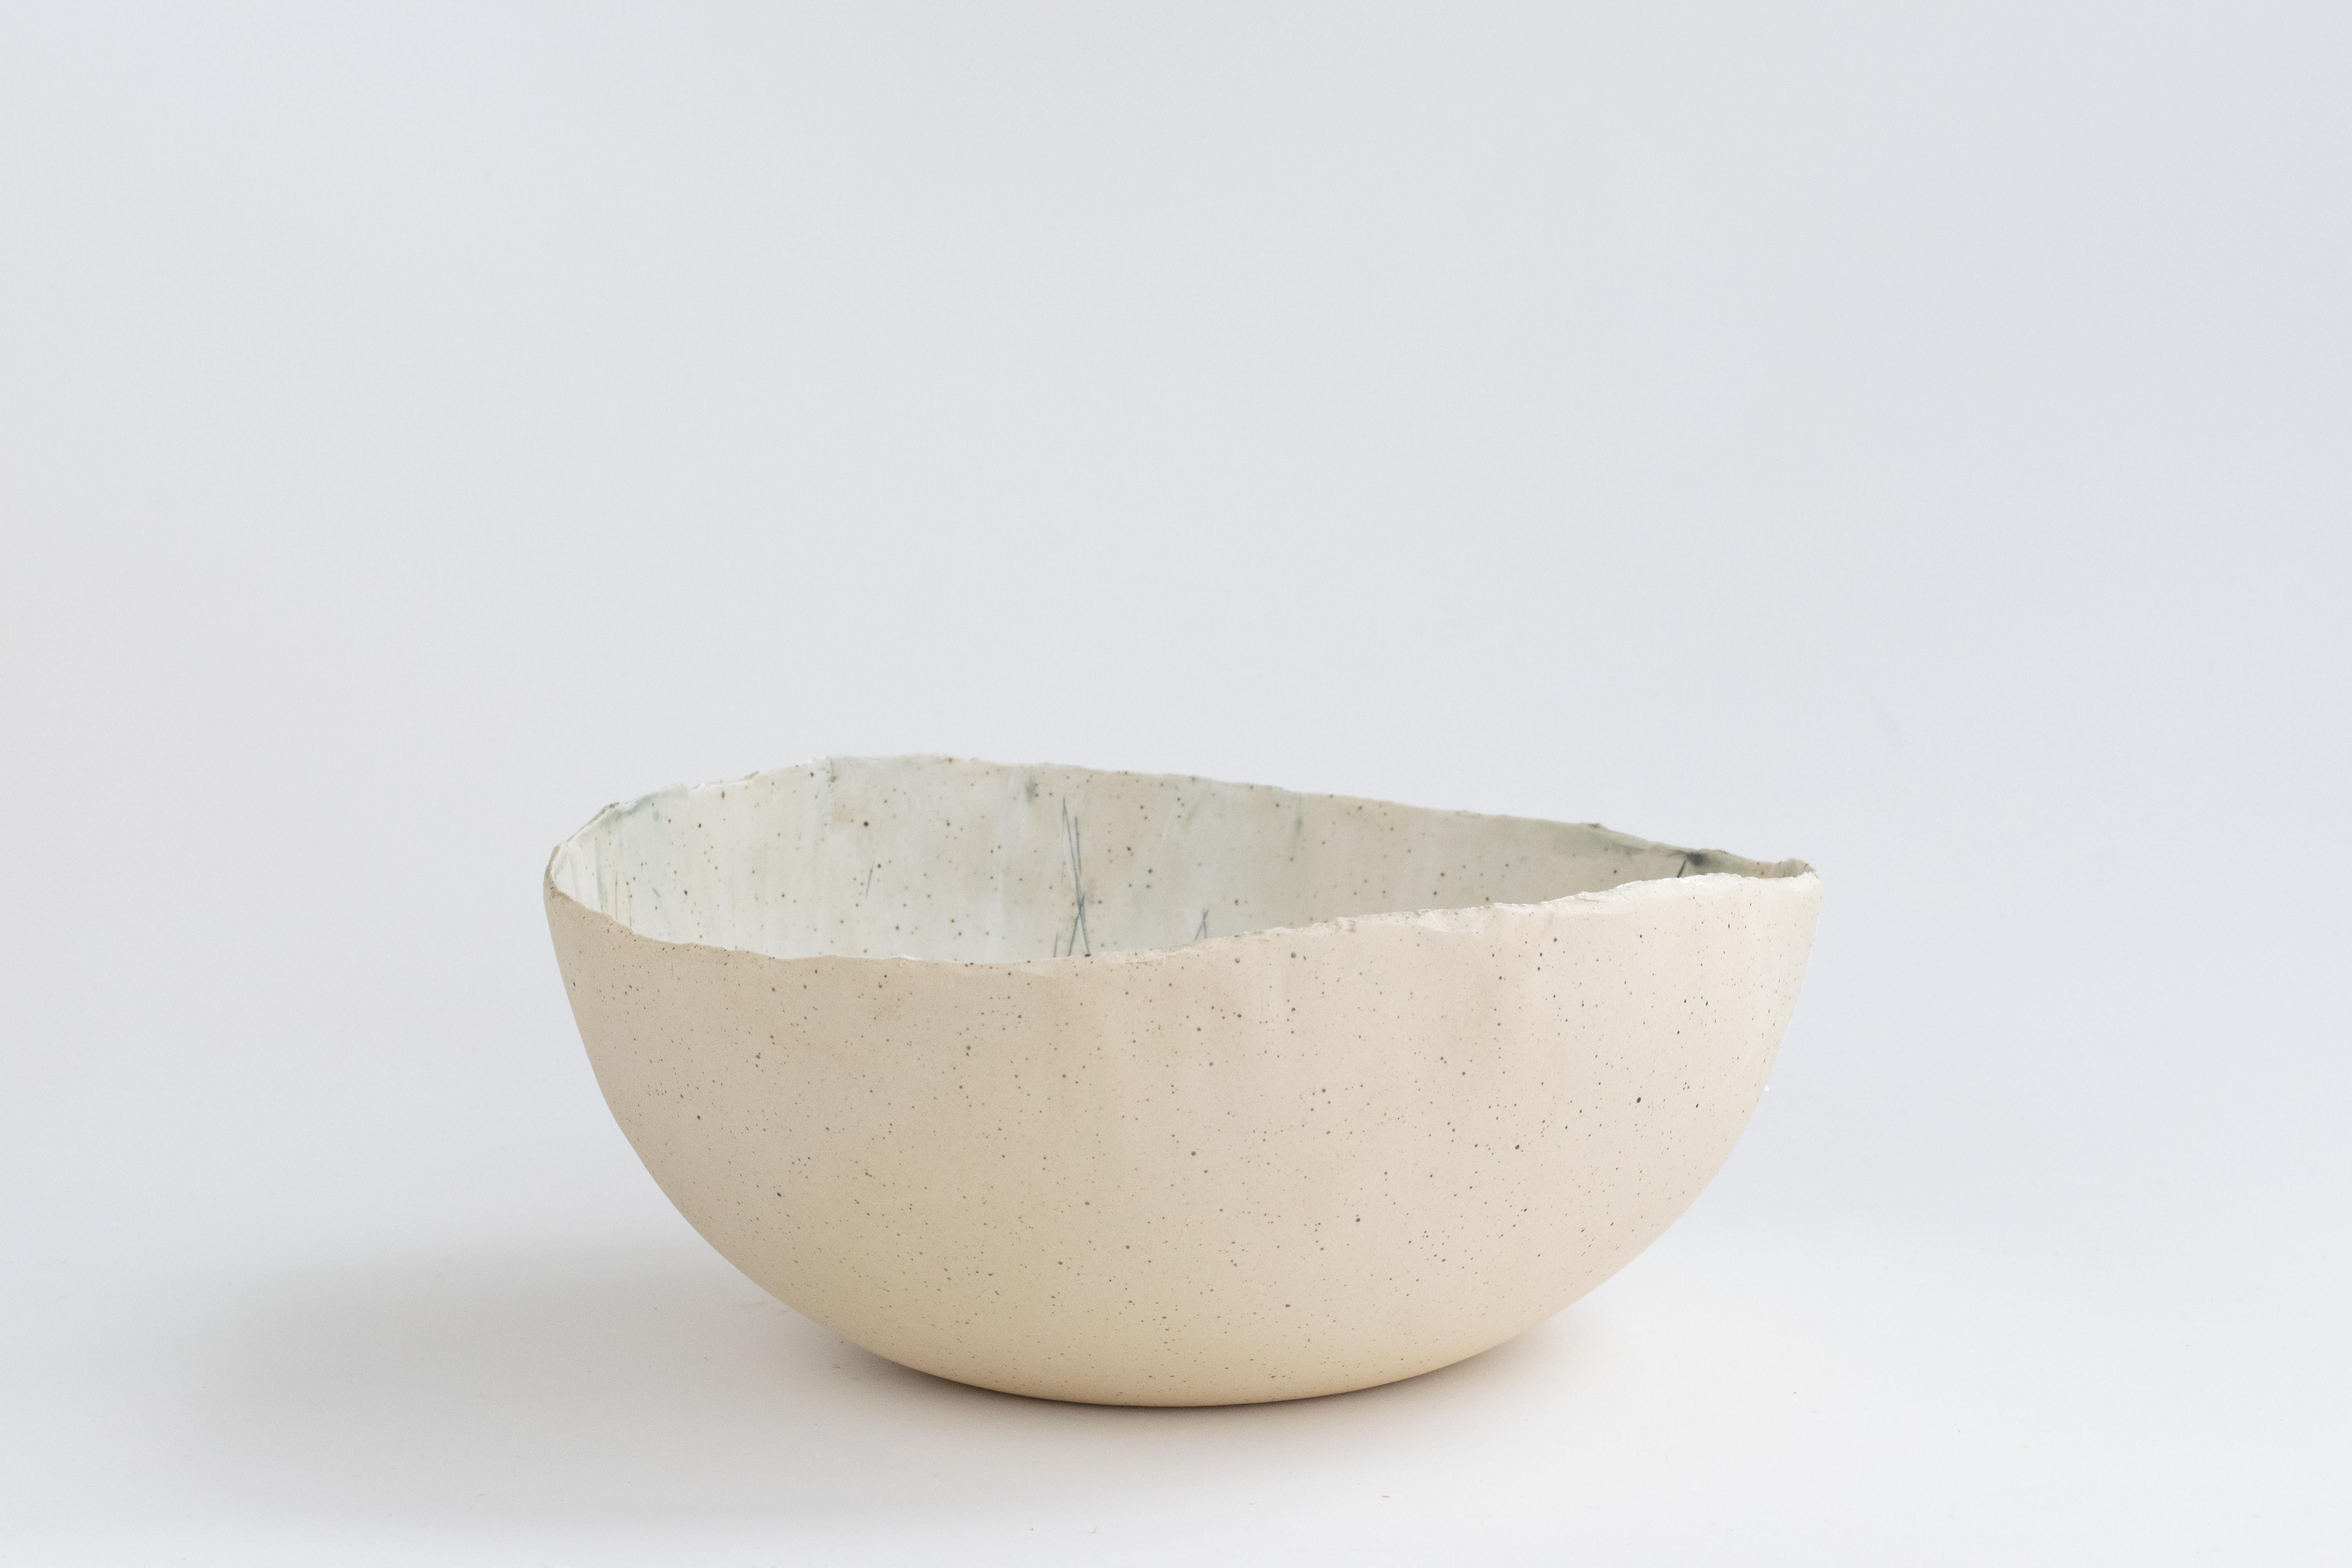 341 Hand Crafted Gathering Stoneware Bowl by Helen Prior

A delicate hand-crafted bowl, organic in shape with a torn clay edge in natural speckled stoneware clay.
Part of the Cross Pollination Series - the stylizing and abstraction of elements from